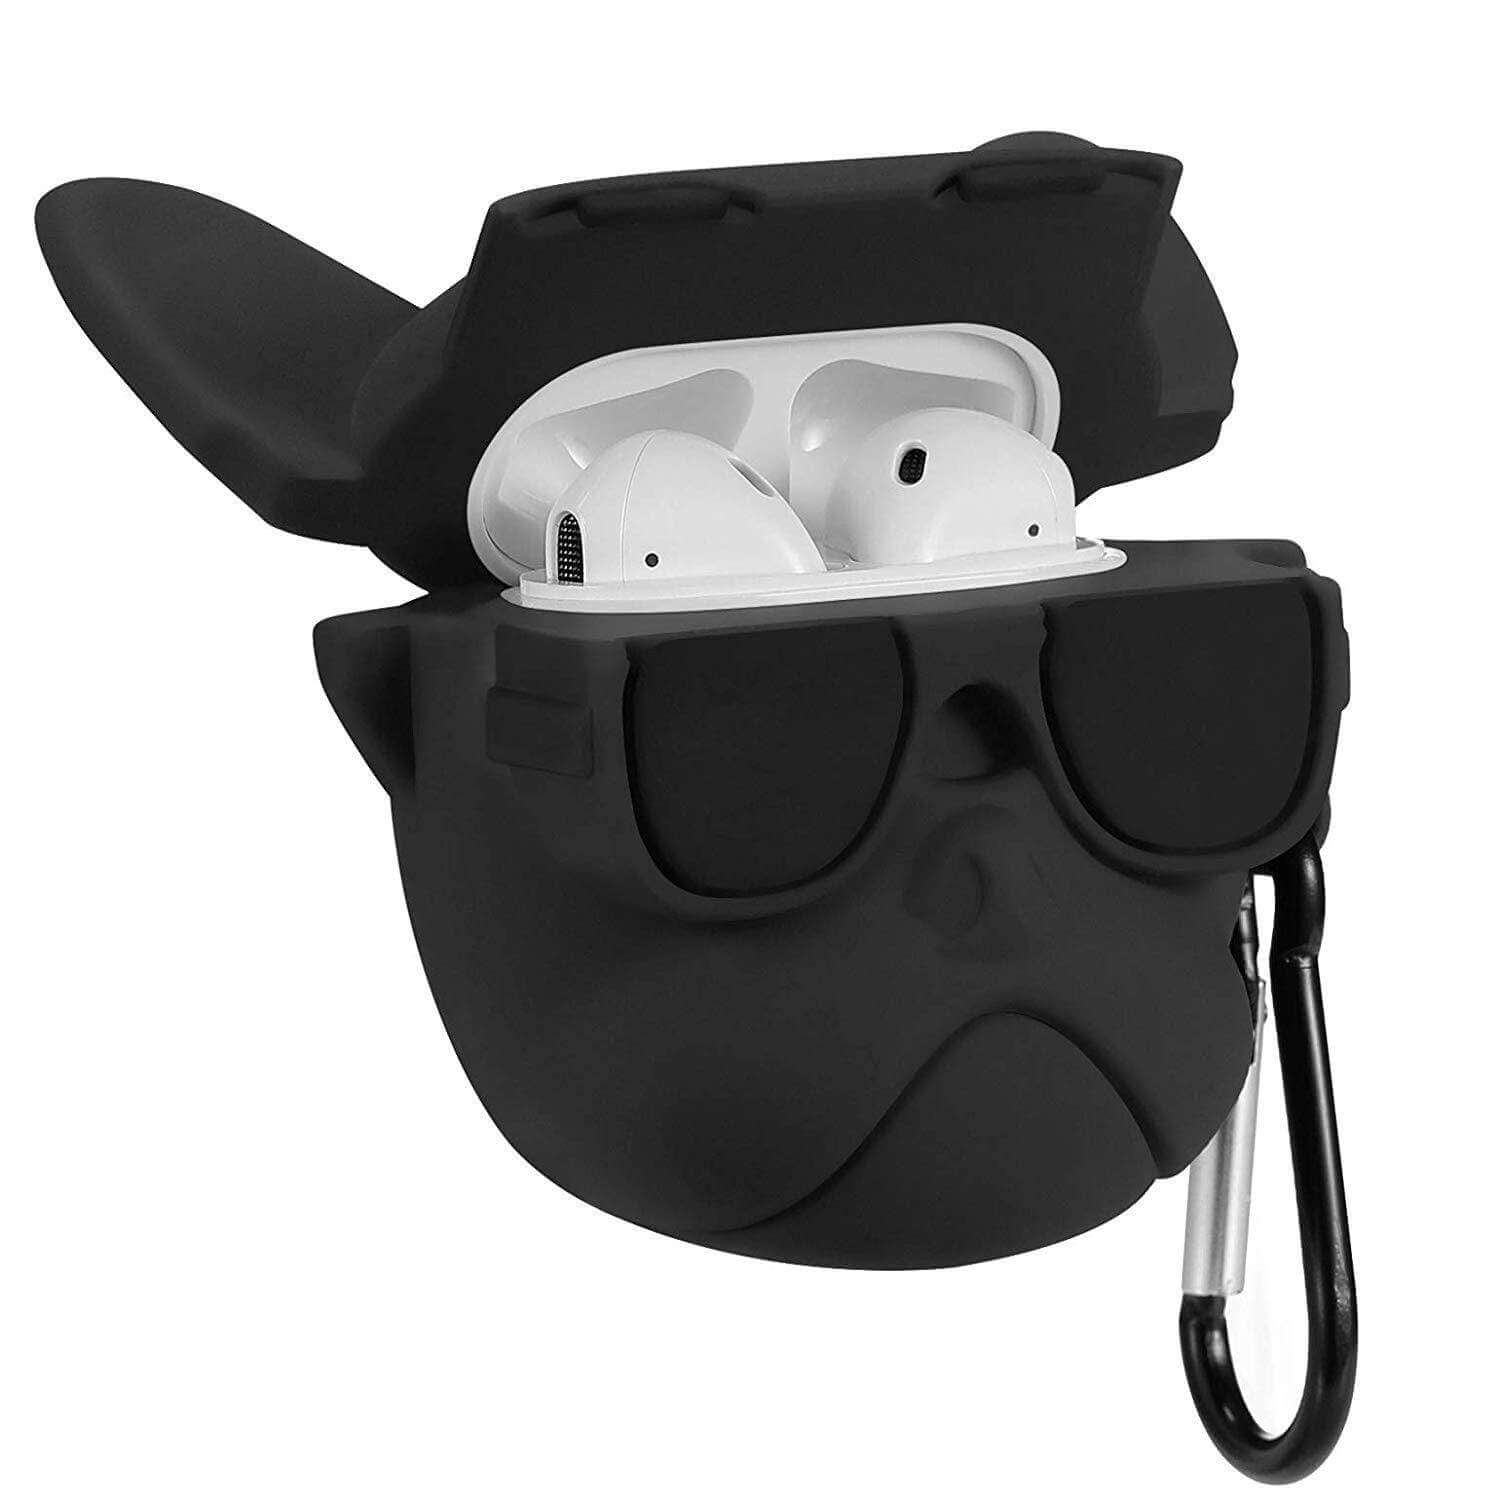 Airdogs Case for Airpods airpods case Happy Paws Online 